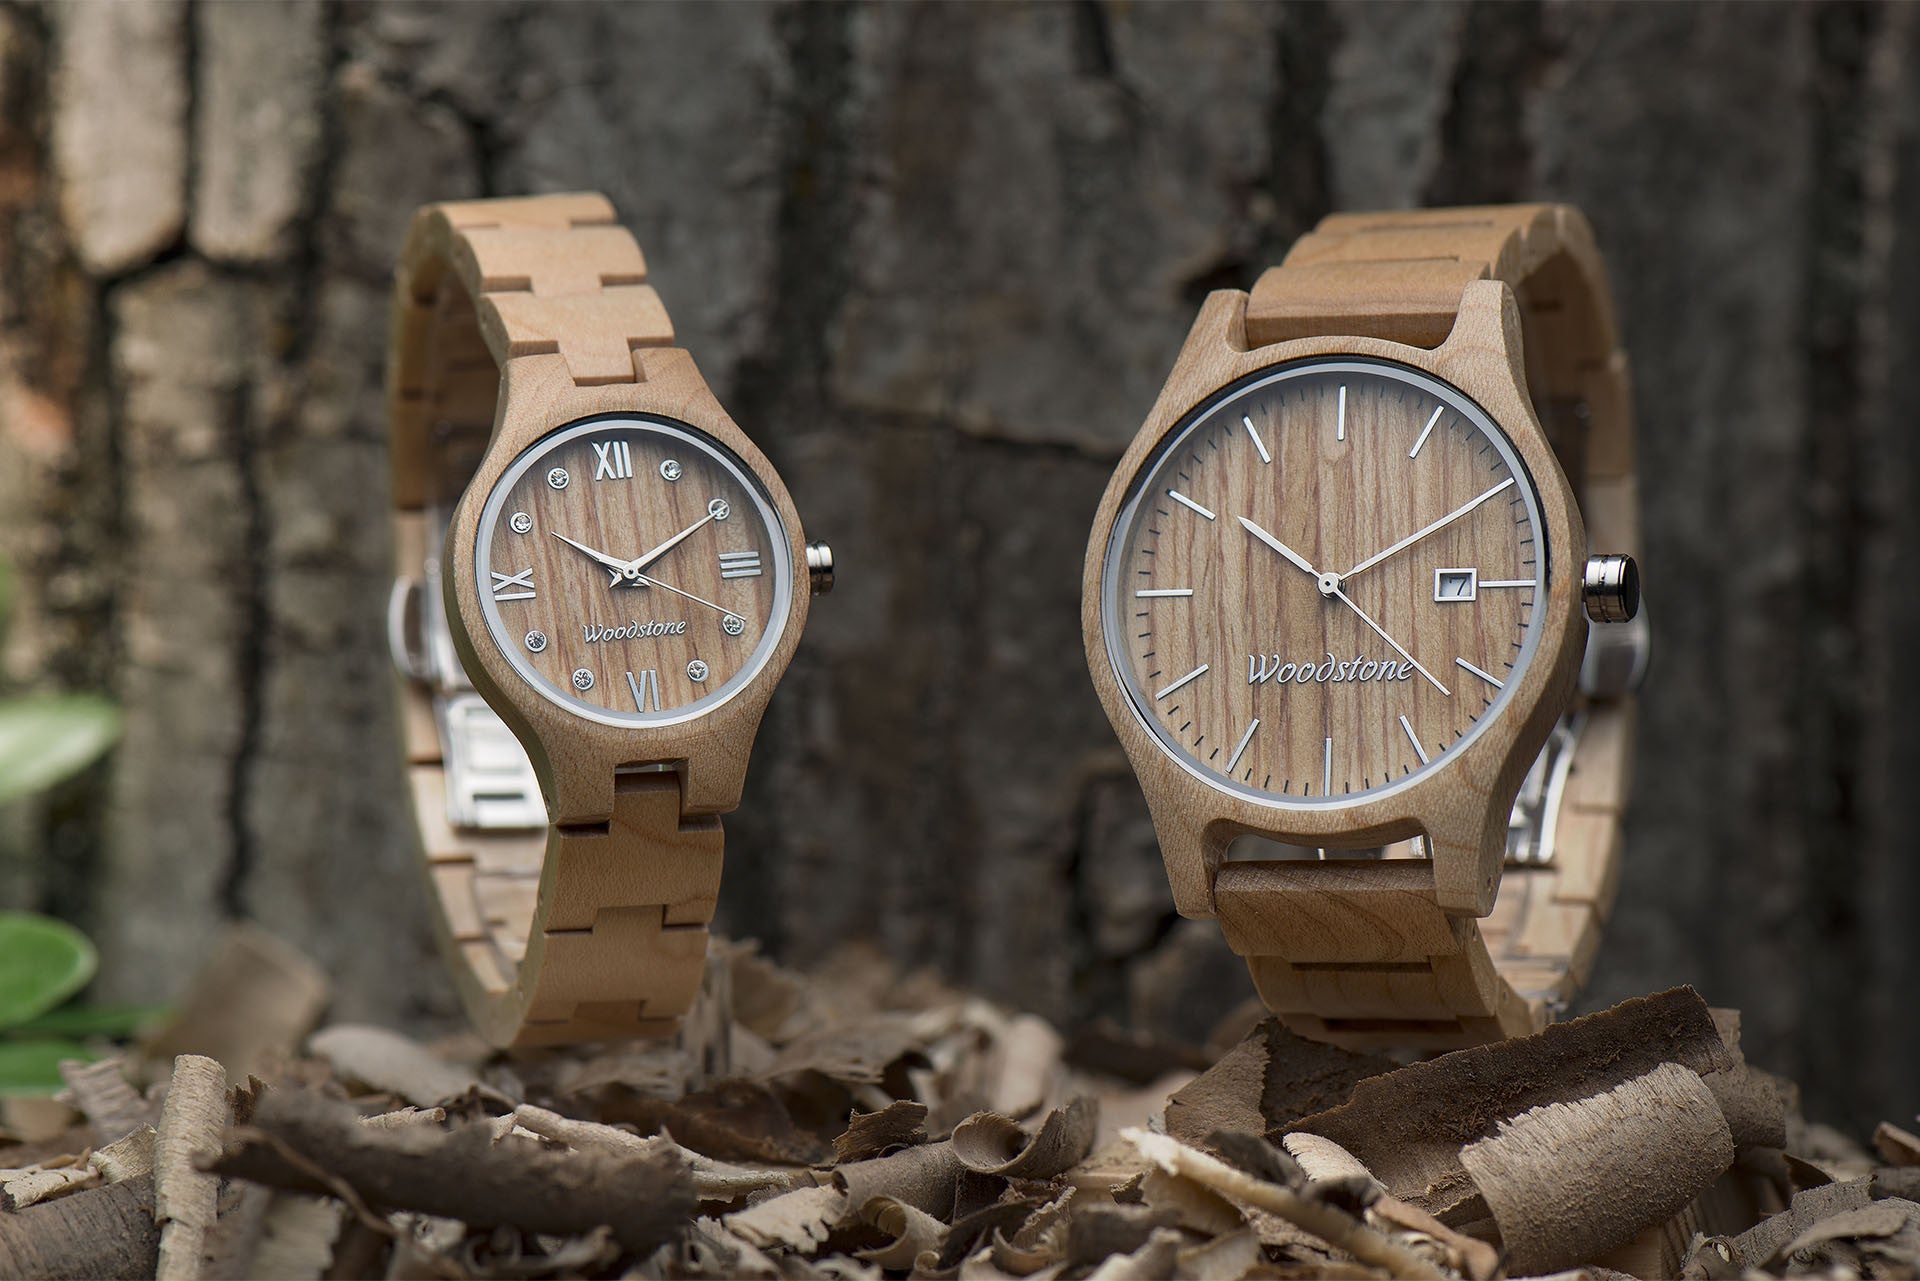 Watches made of interesting materials